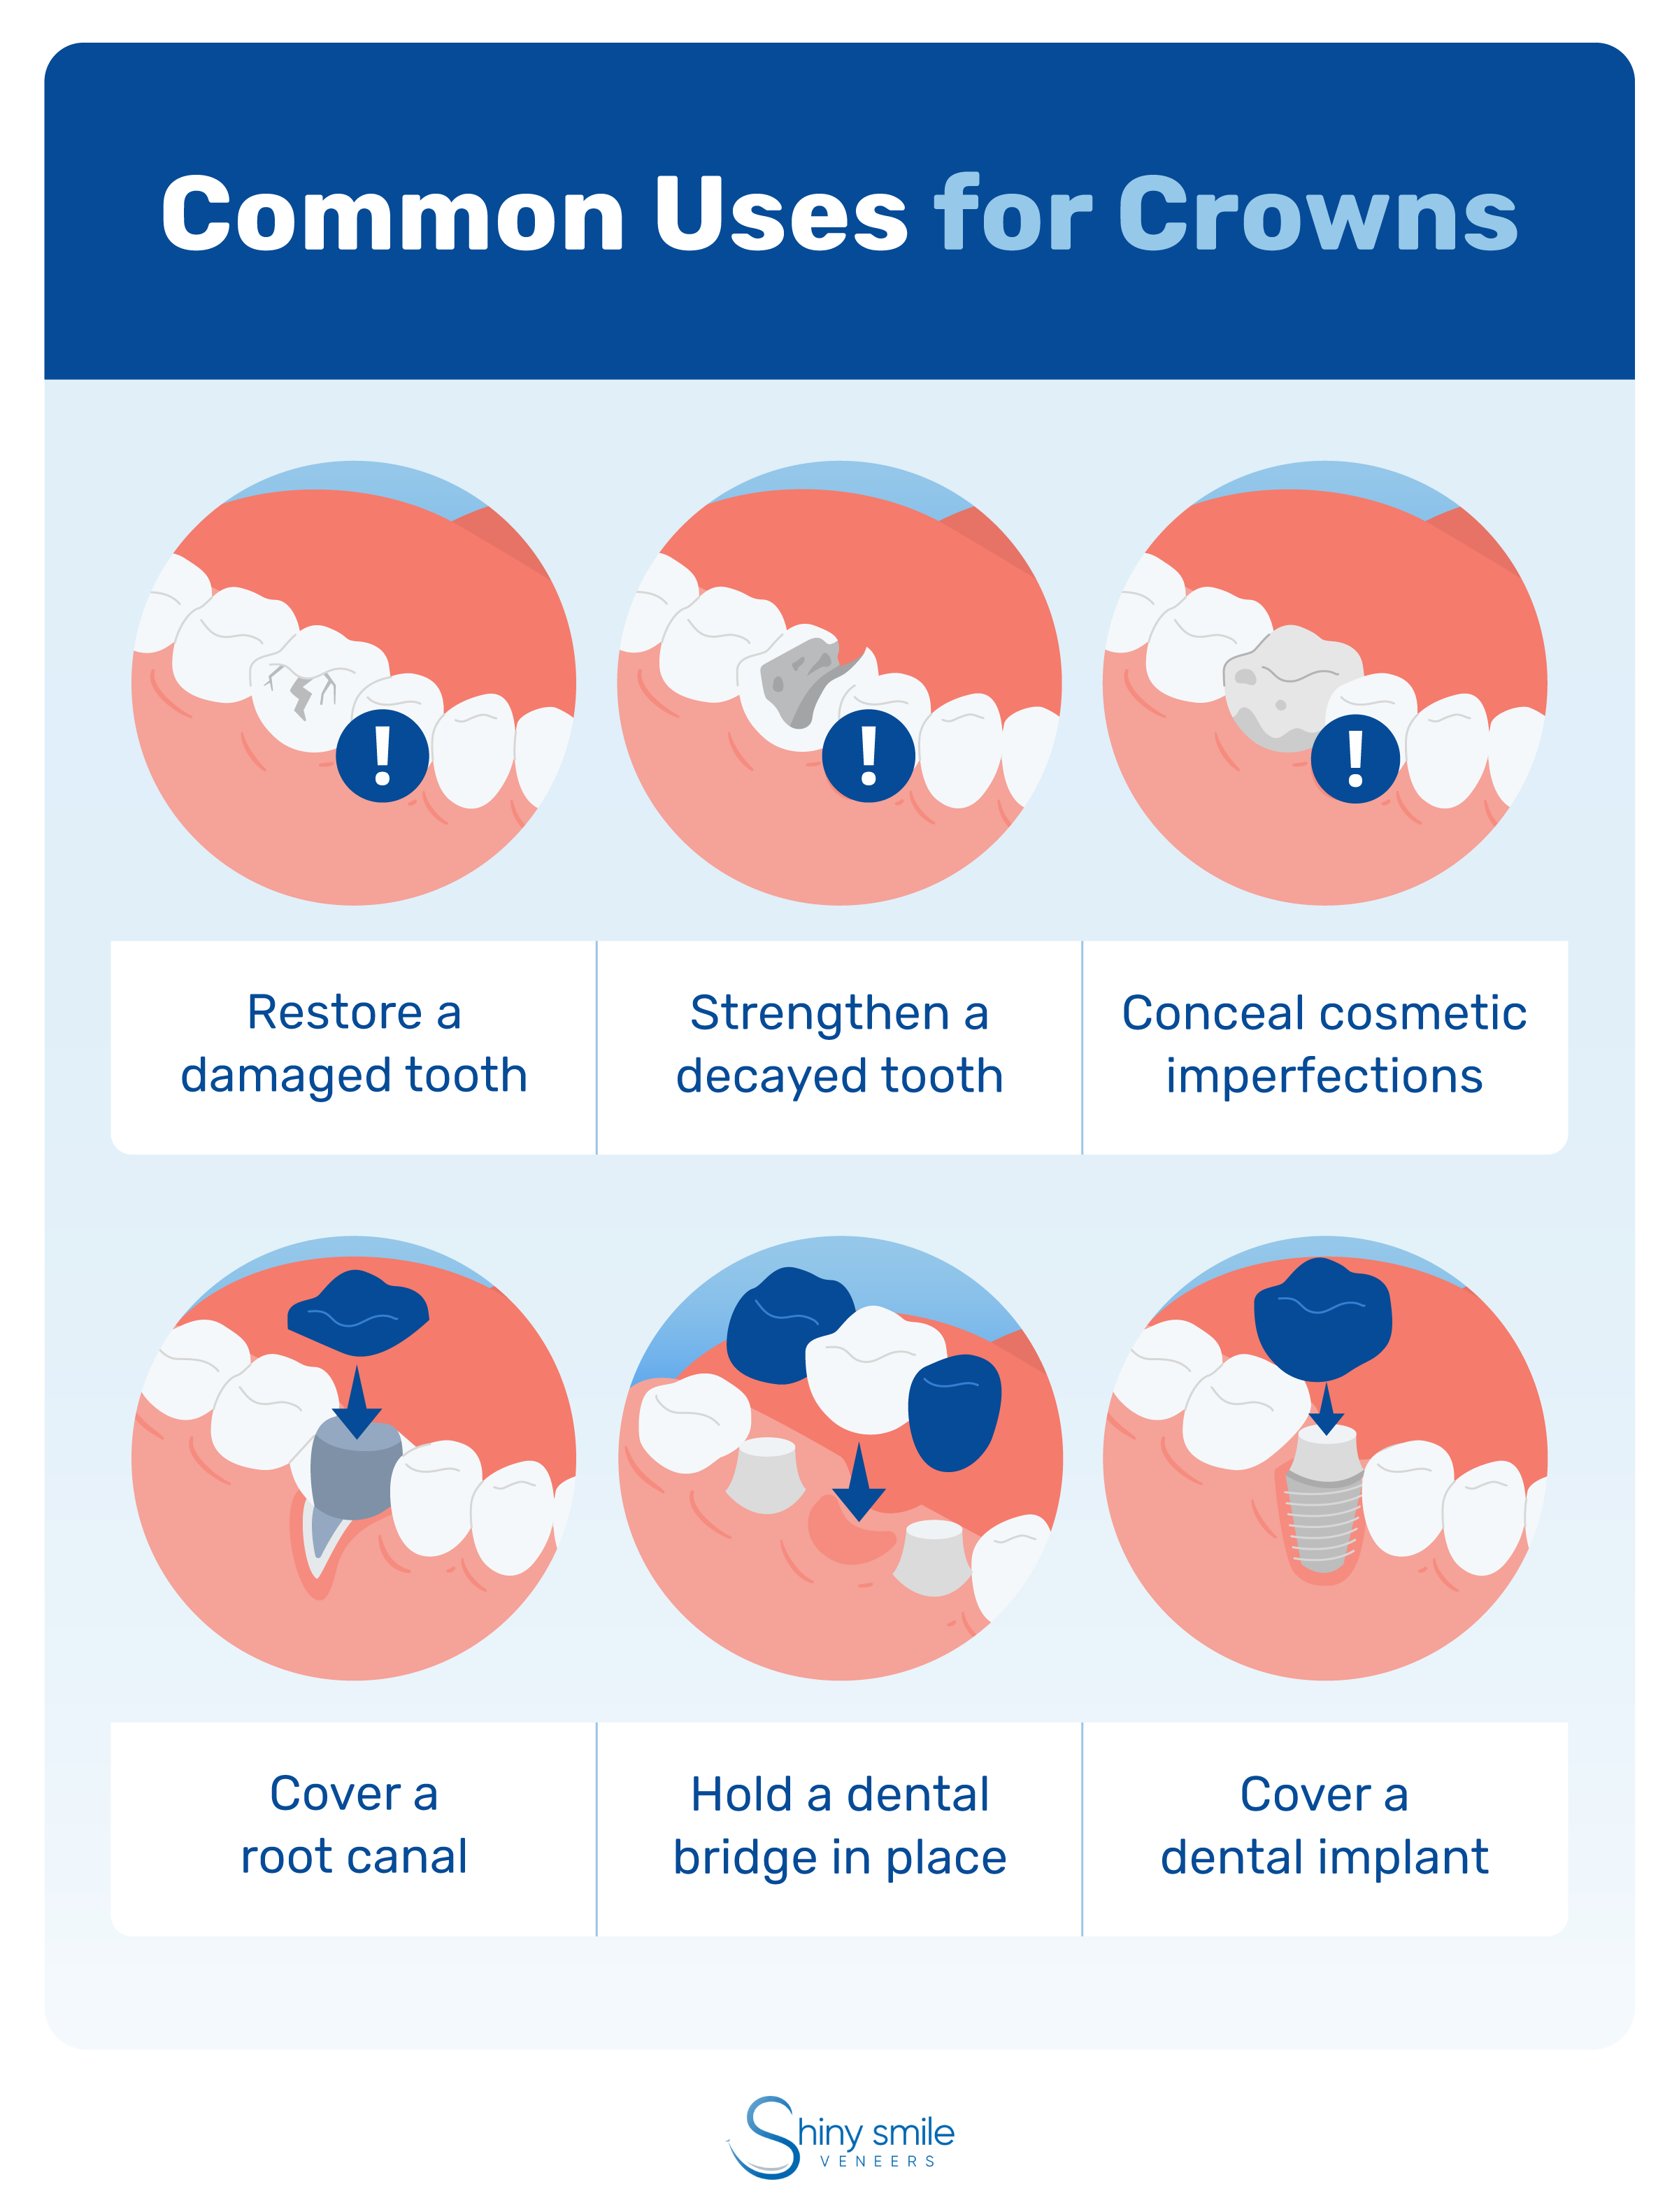 Common uses for dental crowns